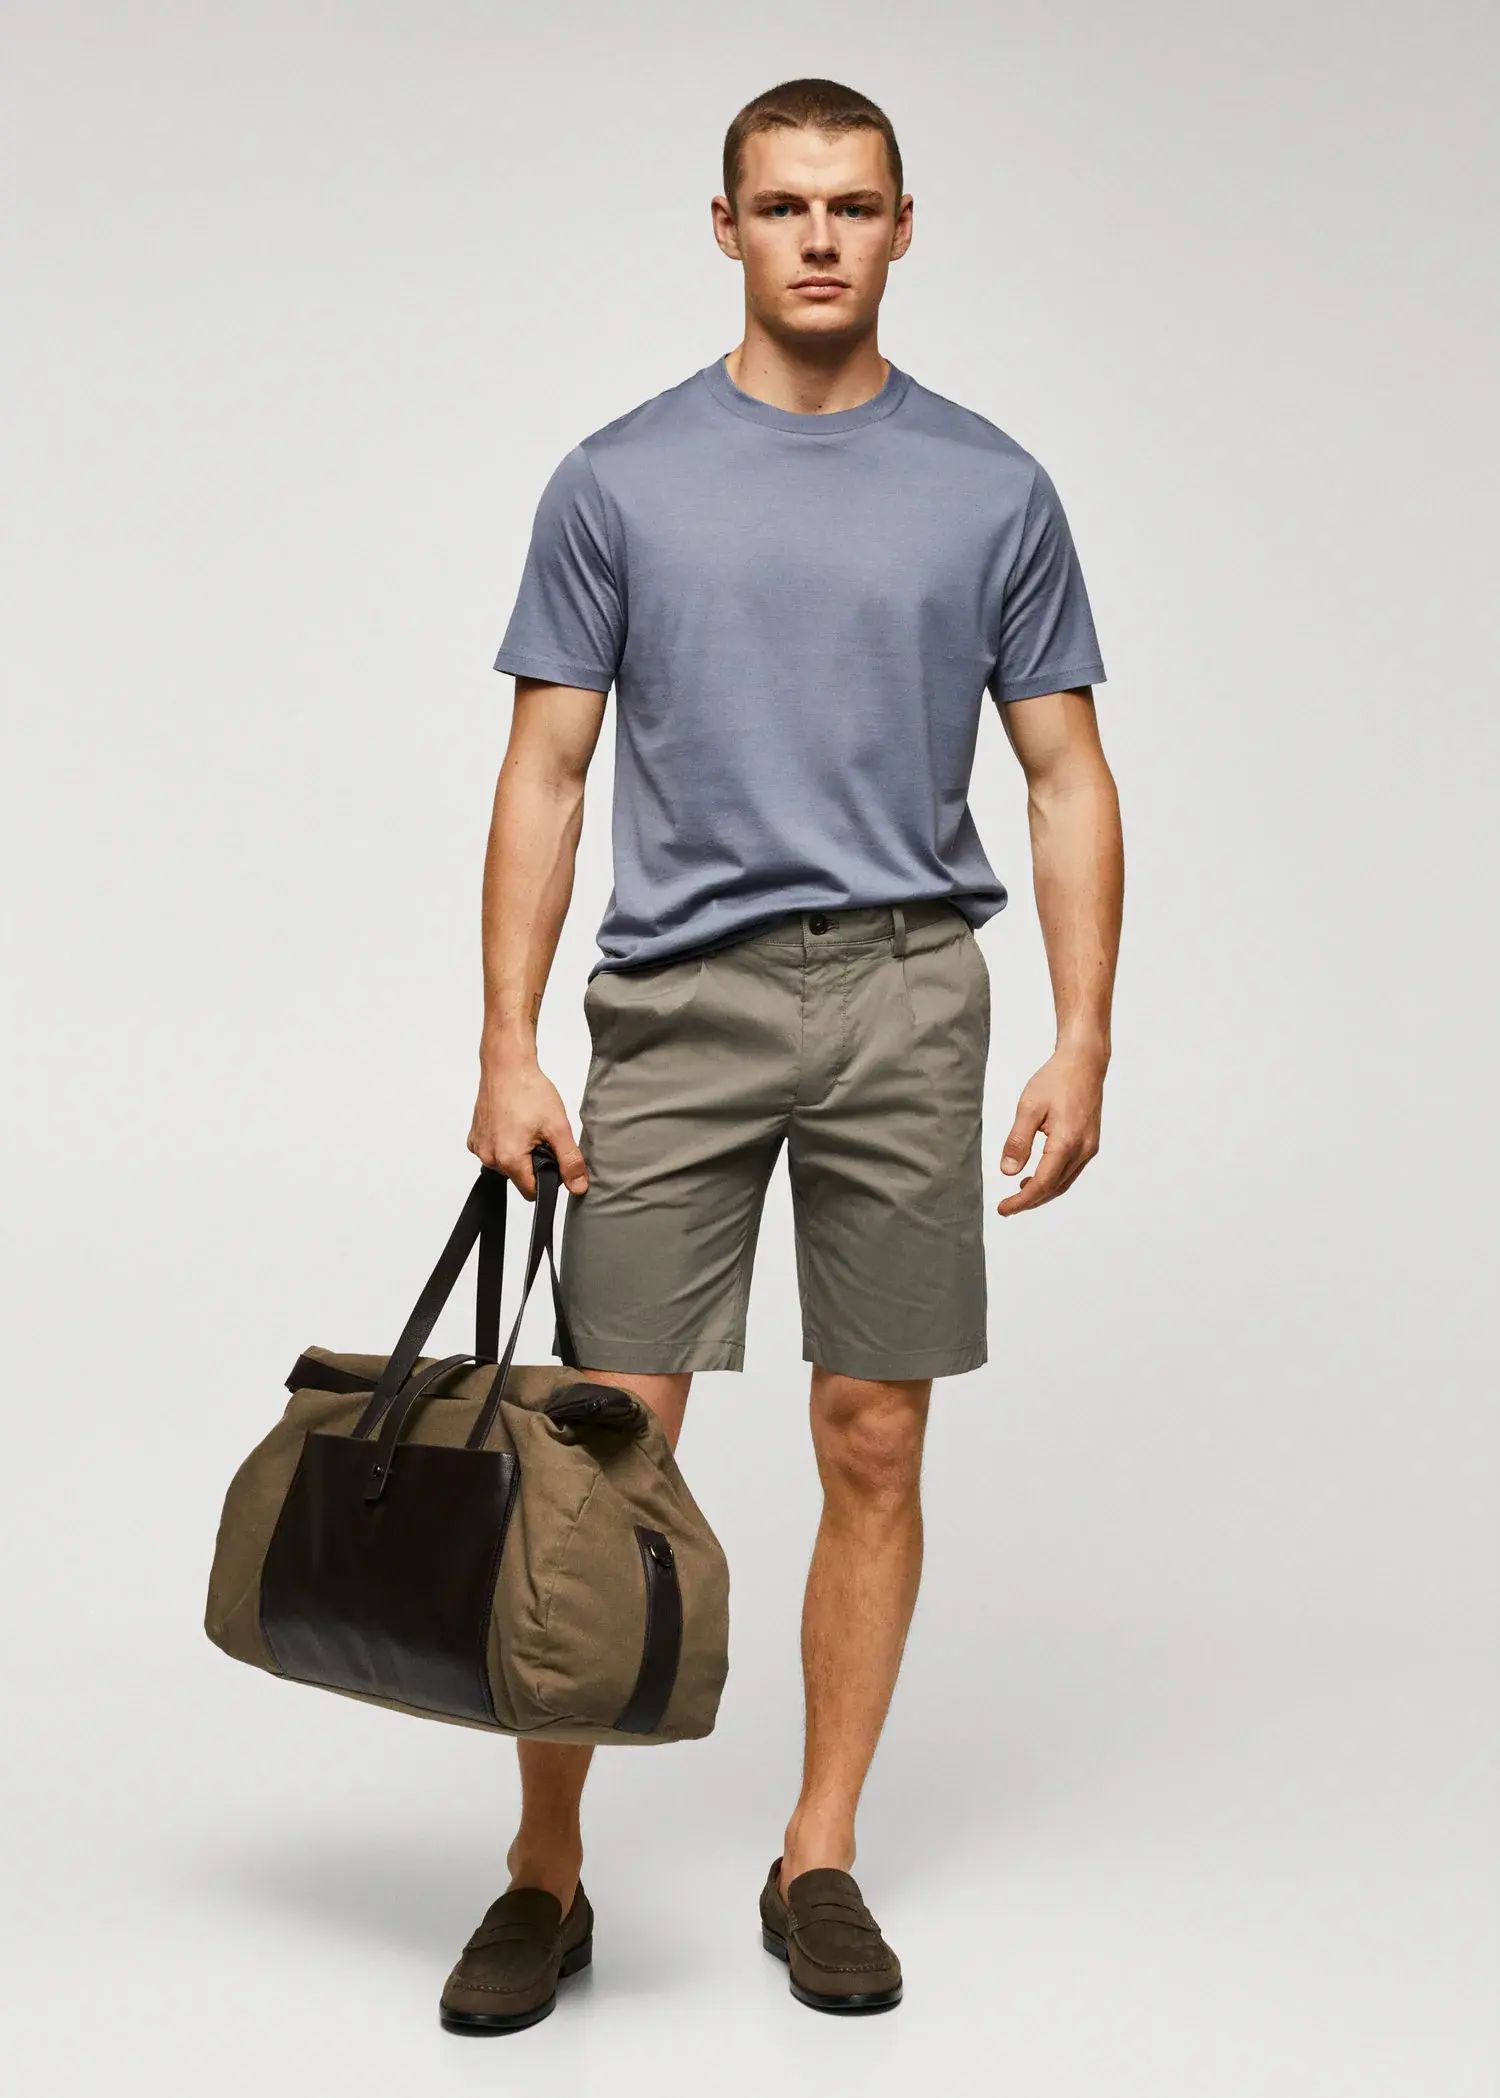 Mango Cotton pleated Bermuda shorts. a man in shorts and a t-shirt is holding a bag. 